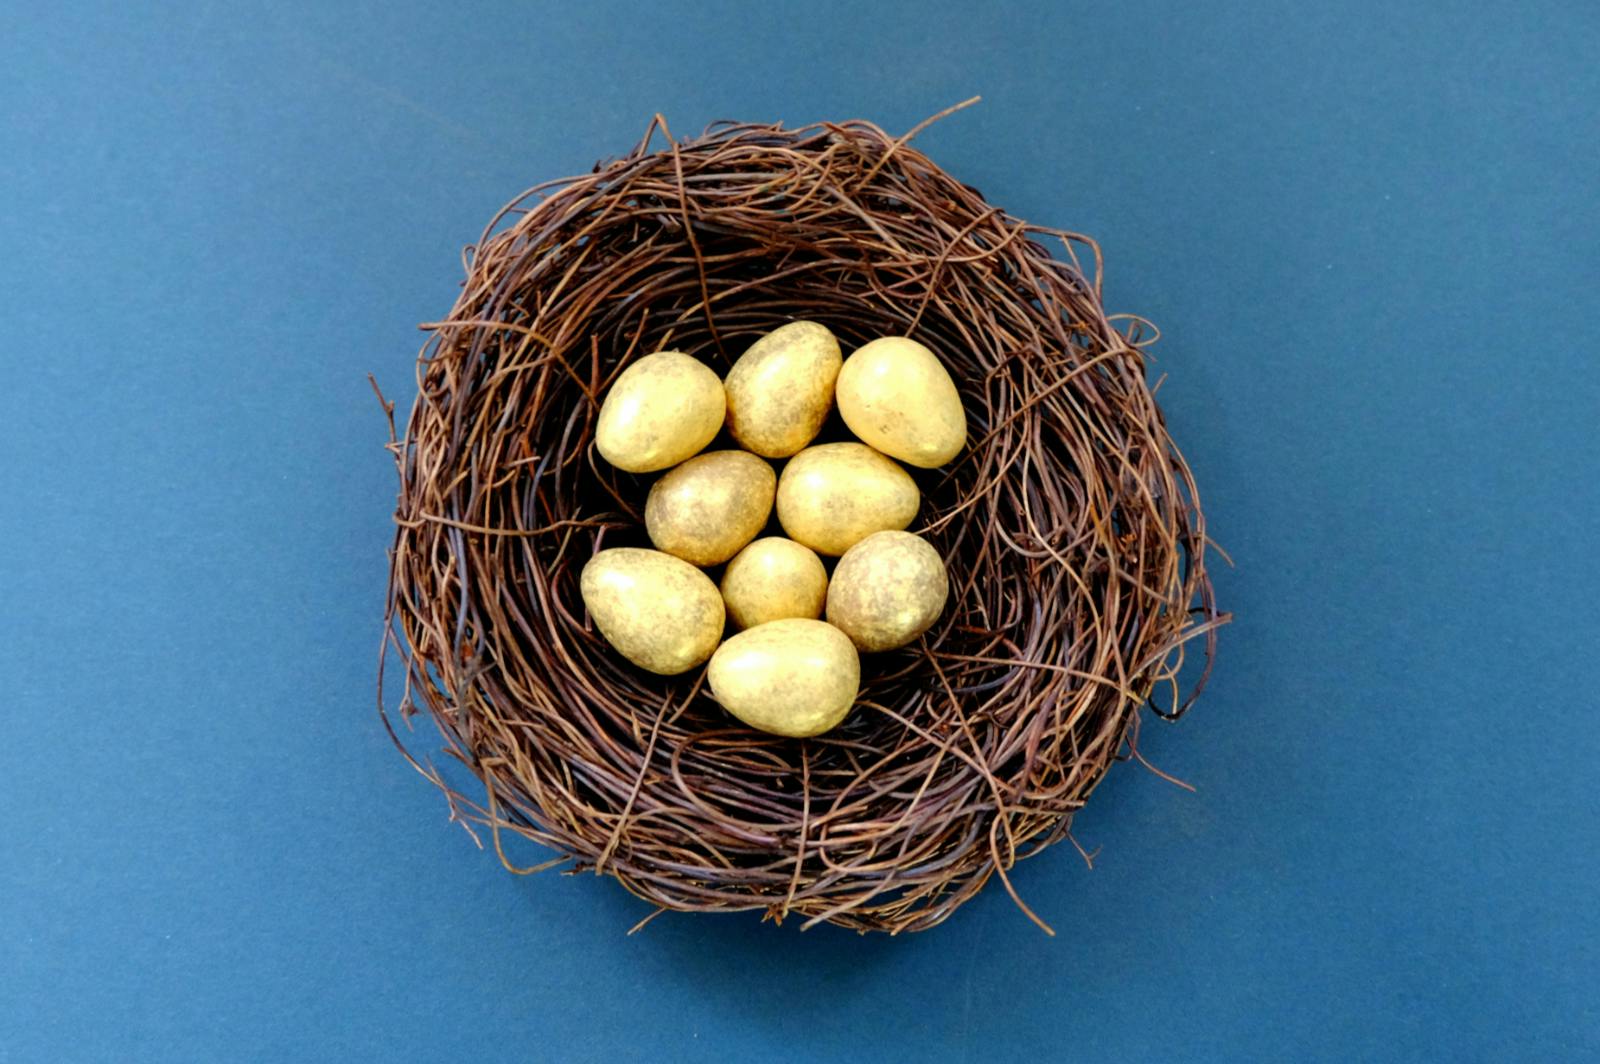 A wicker basket holding nine golden eggs on blue background representing a lack of or false diversification in online ad strategy, which b00st.com helps to solve for artists across the music industry.